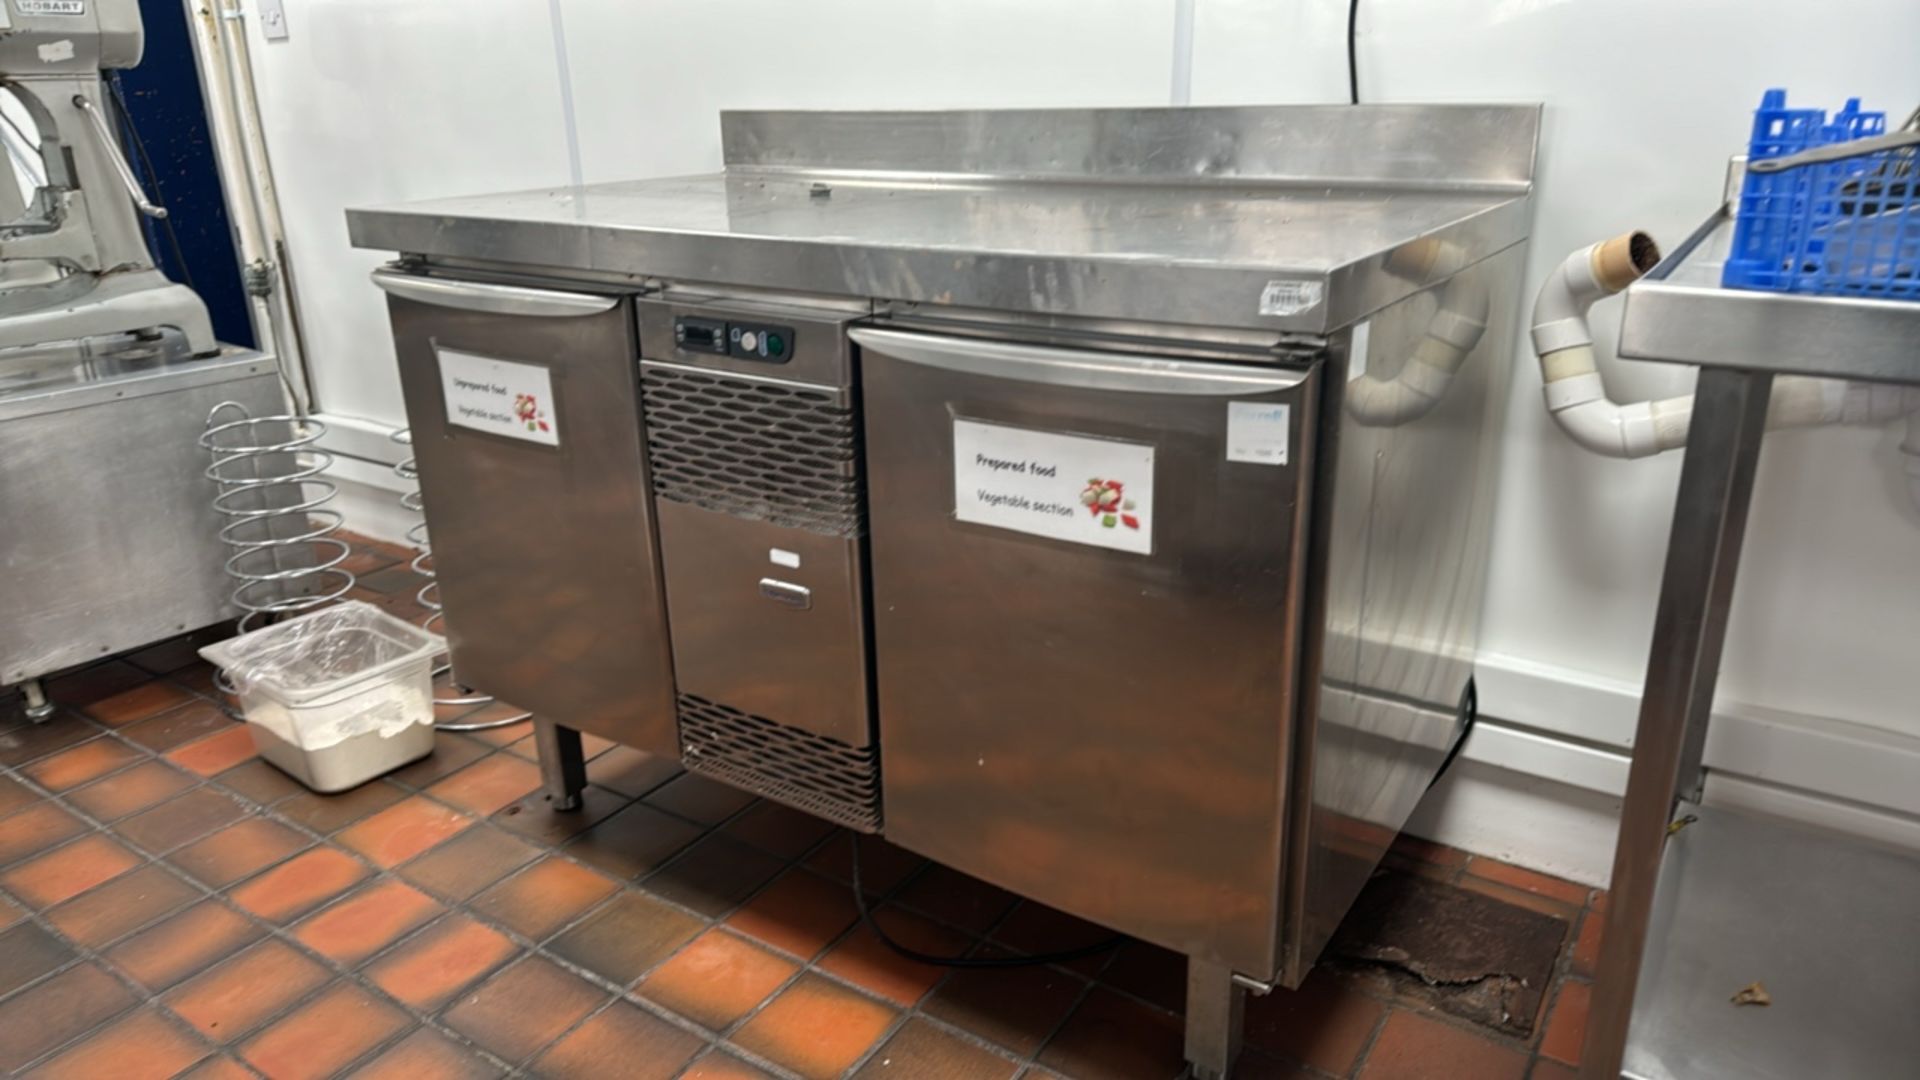 Electrolux Stainless Steel Preparation Unit With Under Counter Fridges - Image 3 of 9